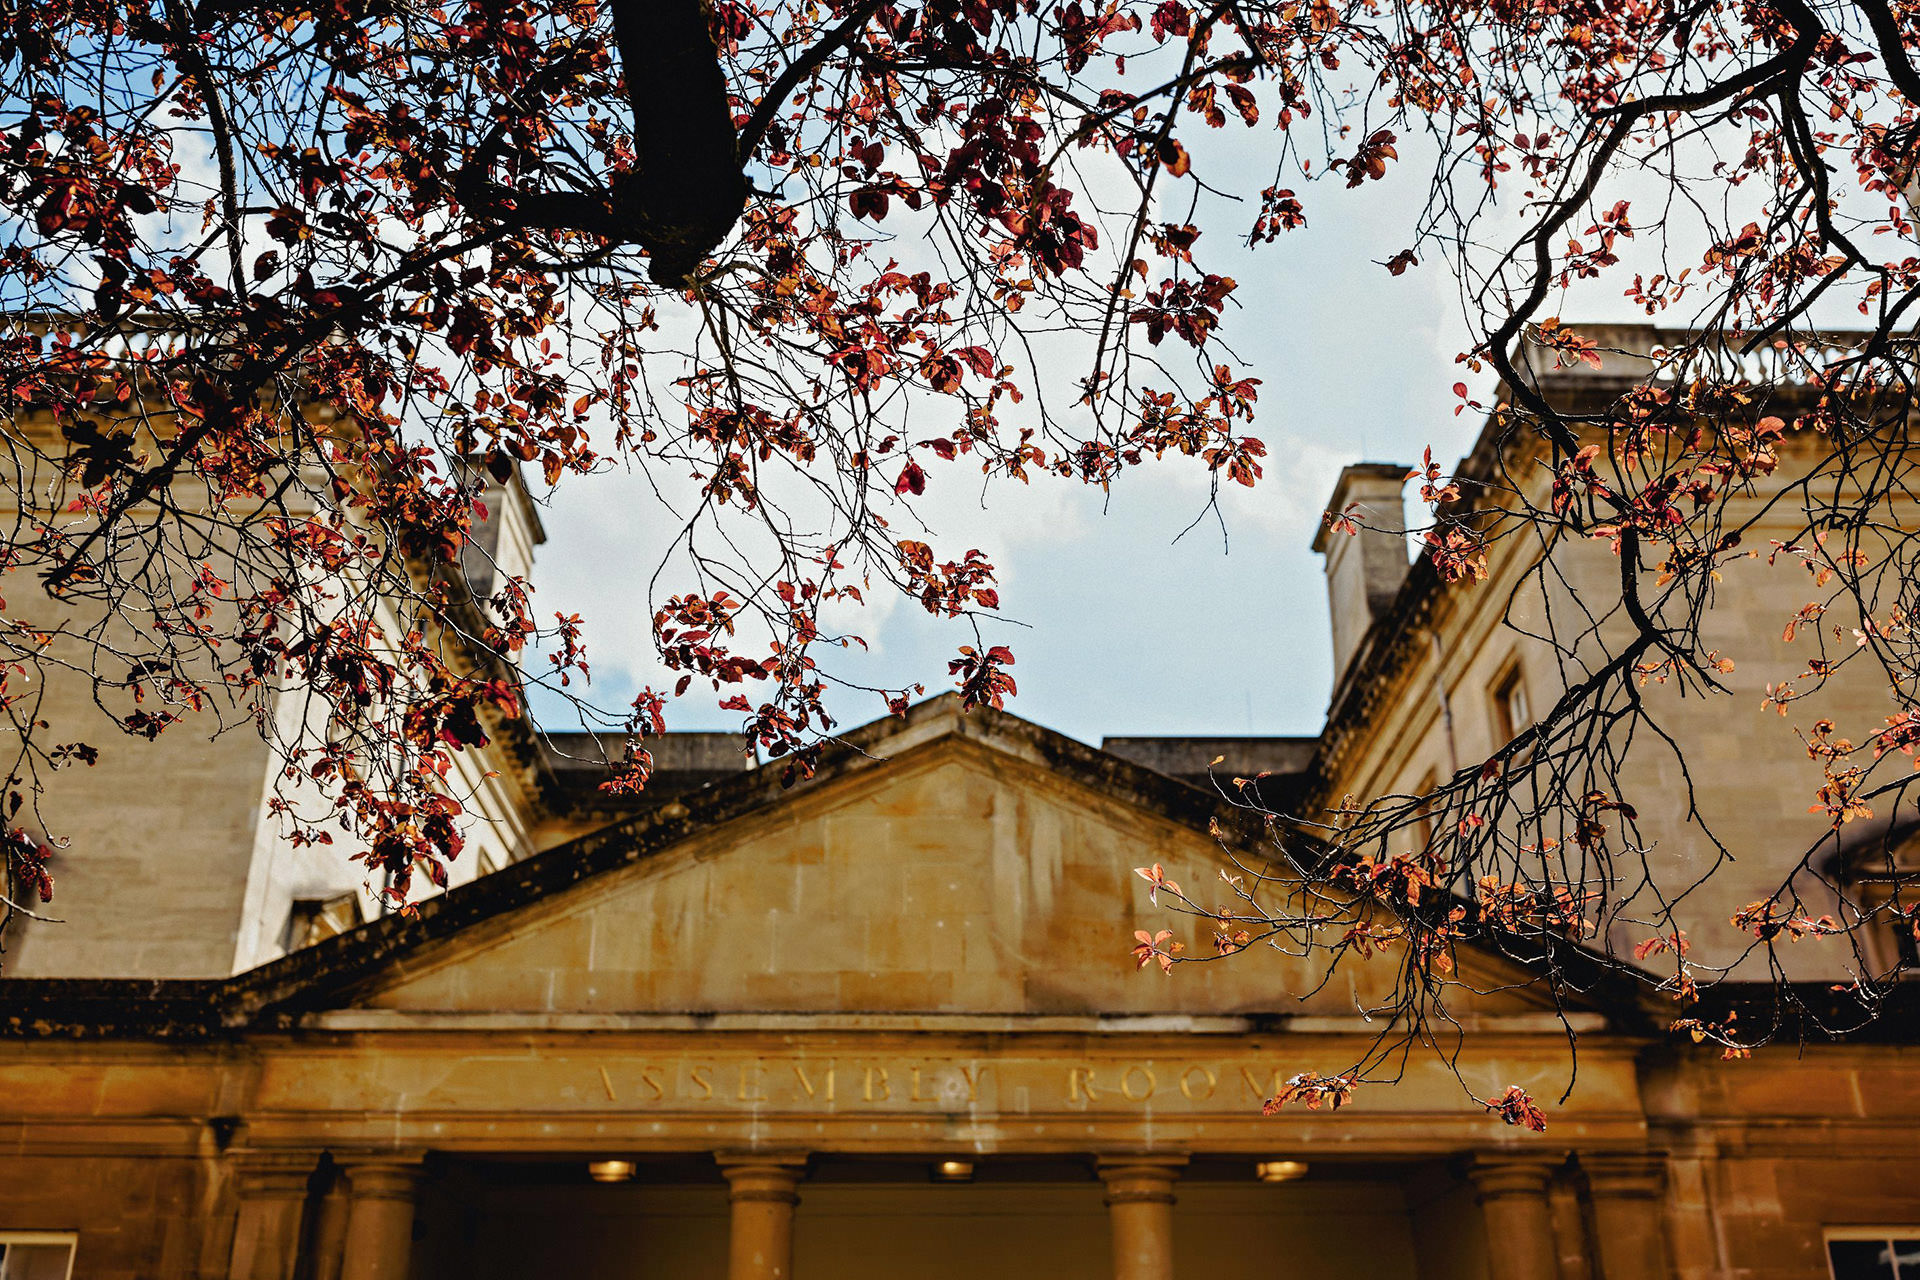 assembly rooms in bath, wedding photography, summer day